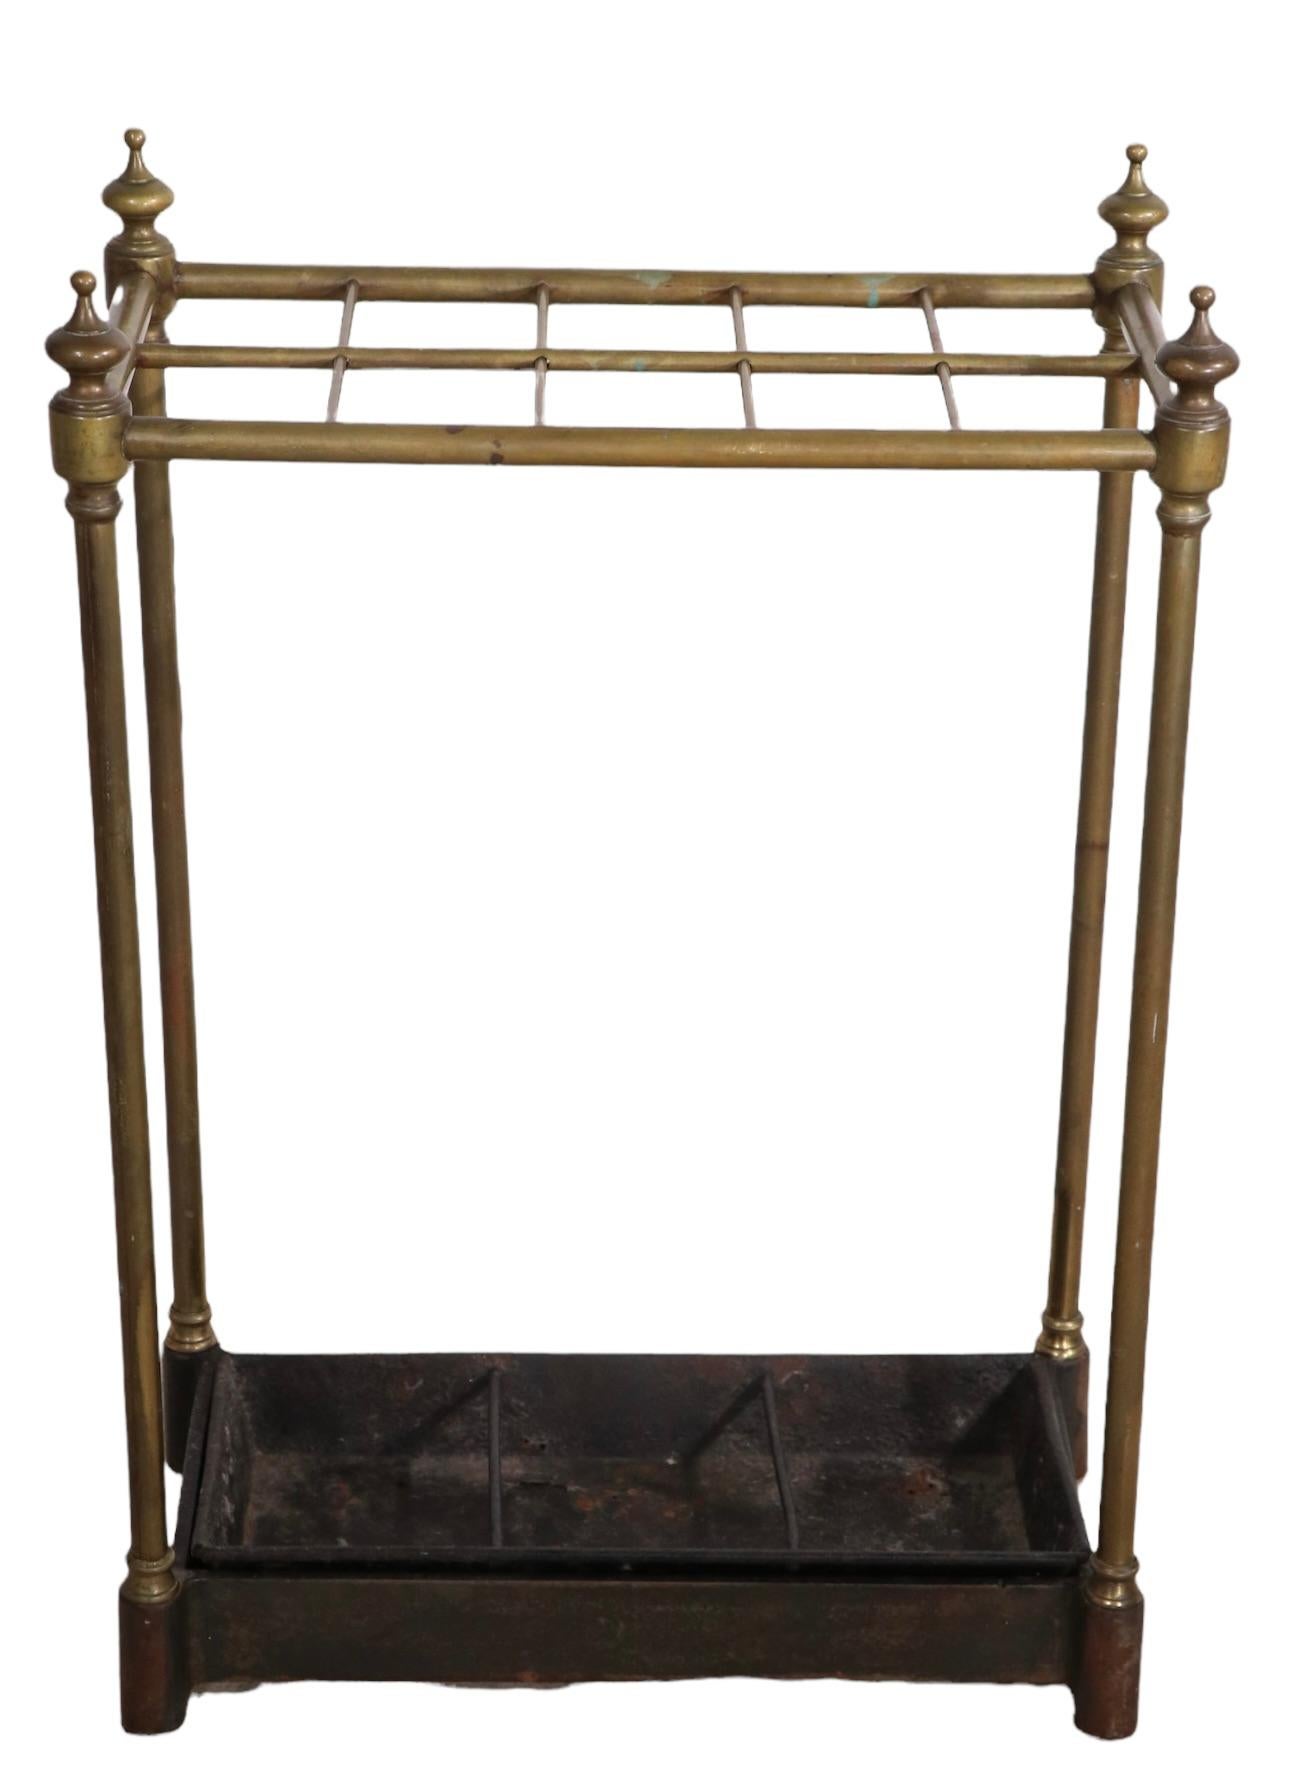 Architectural Brass and Iron Cane Umbrella Stand For Sale 9